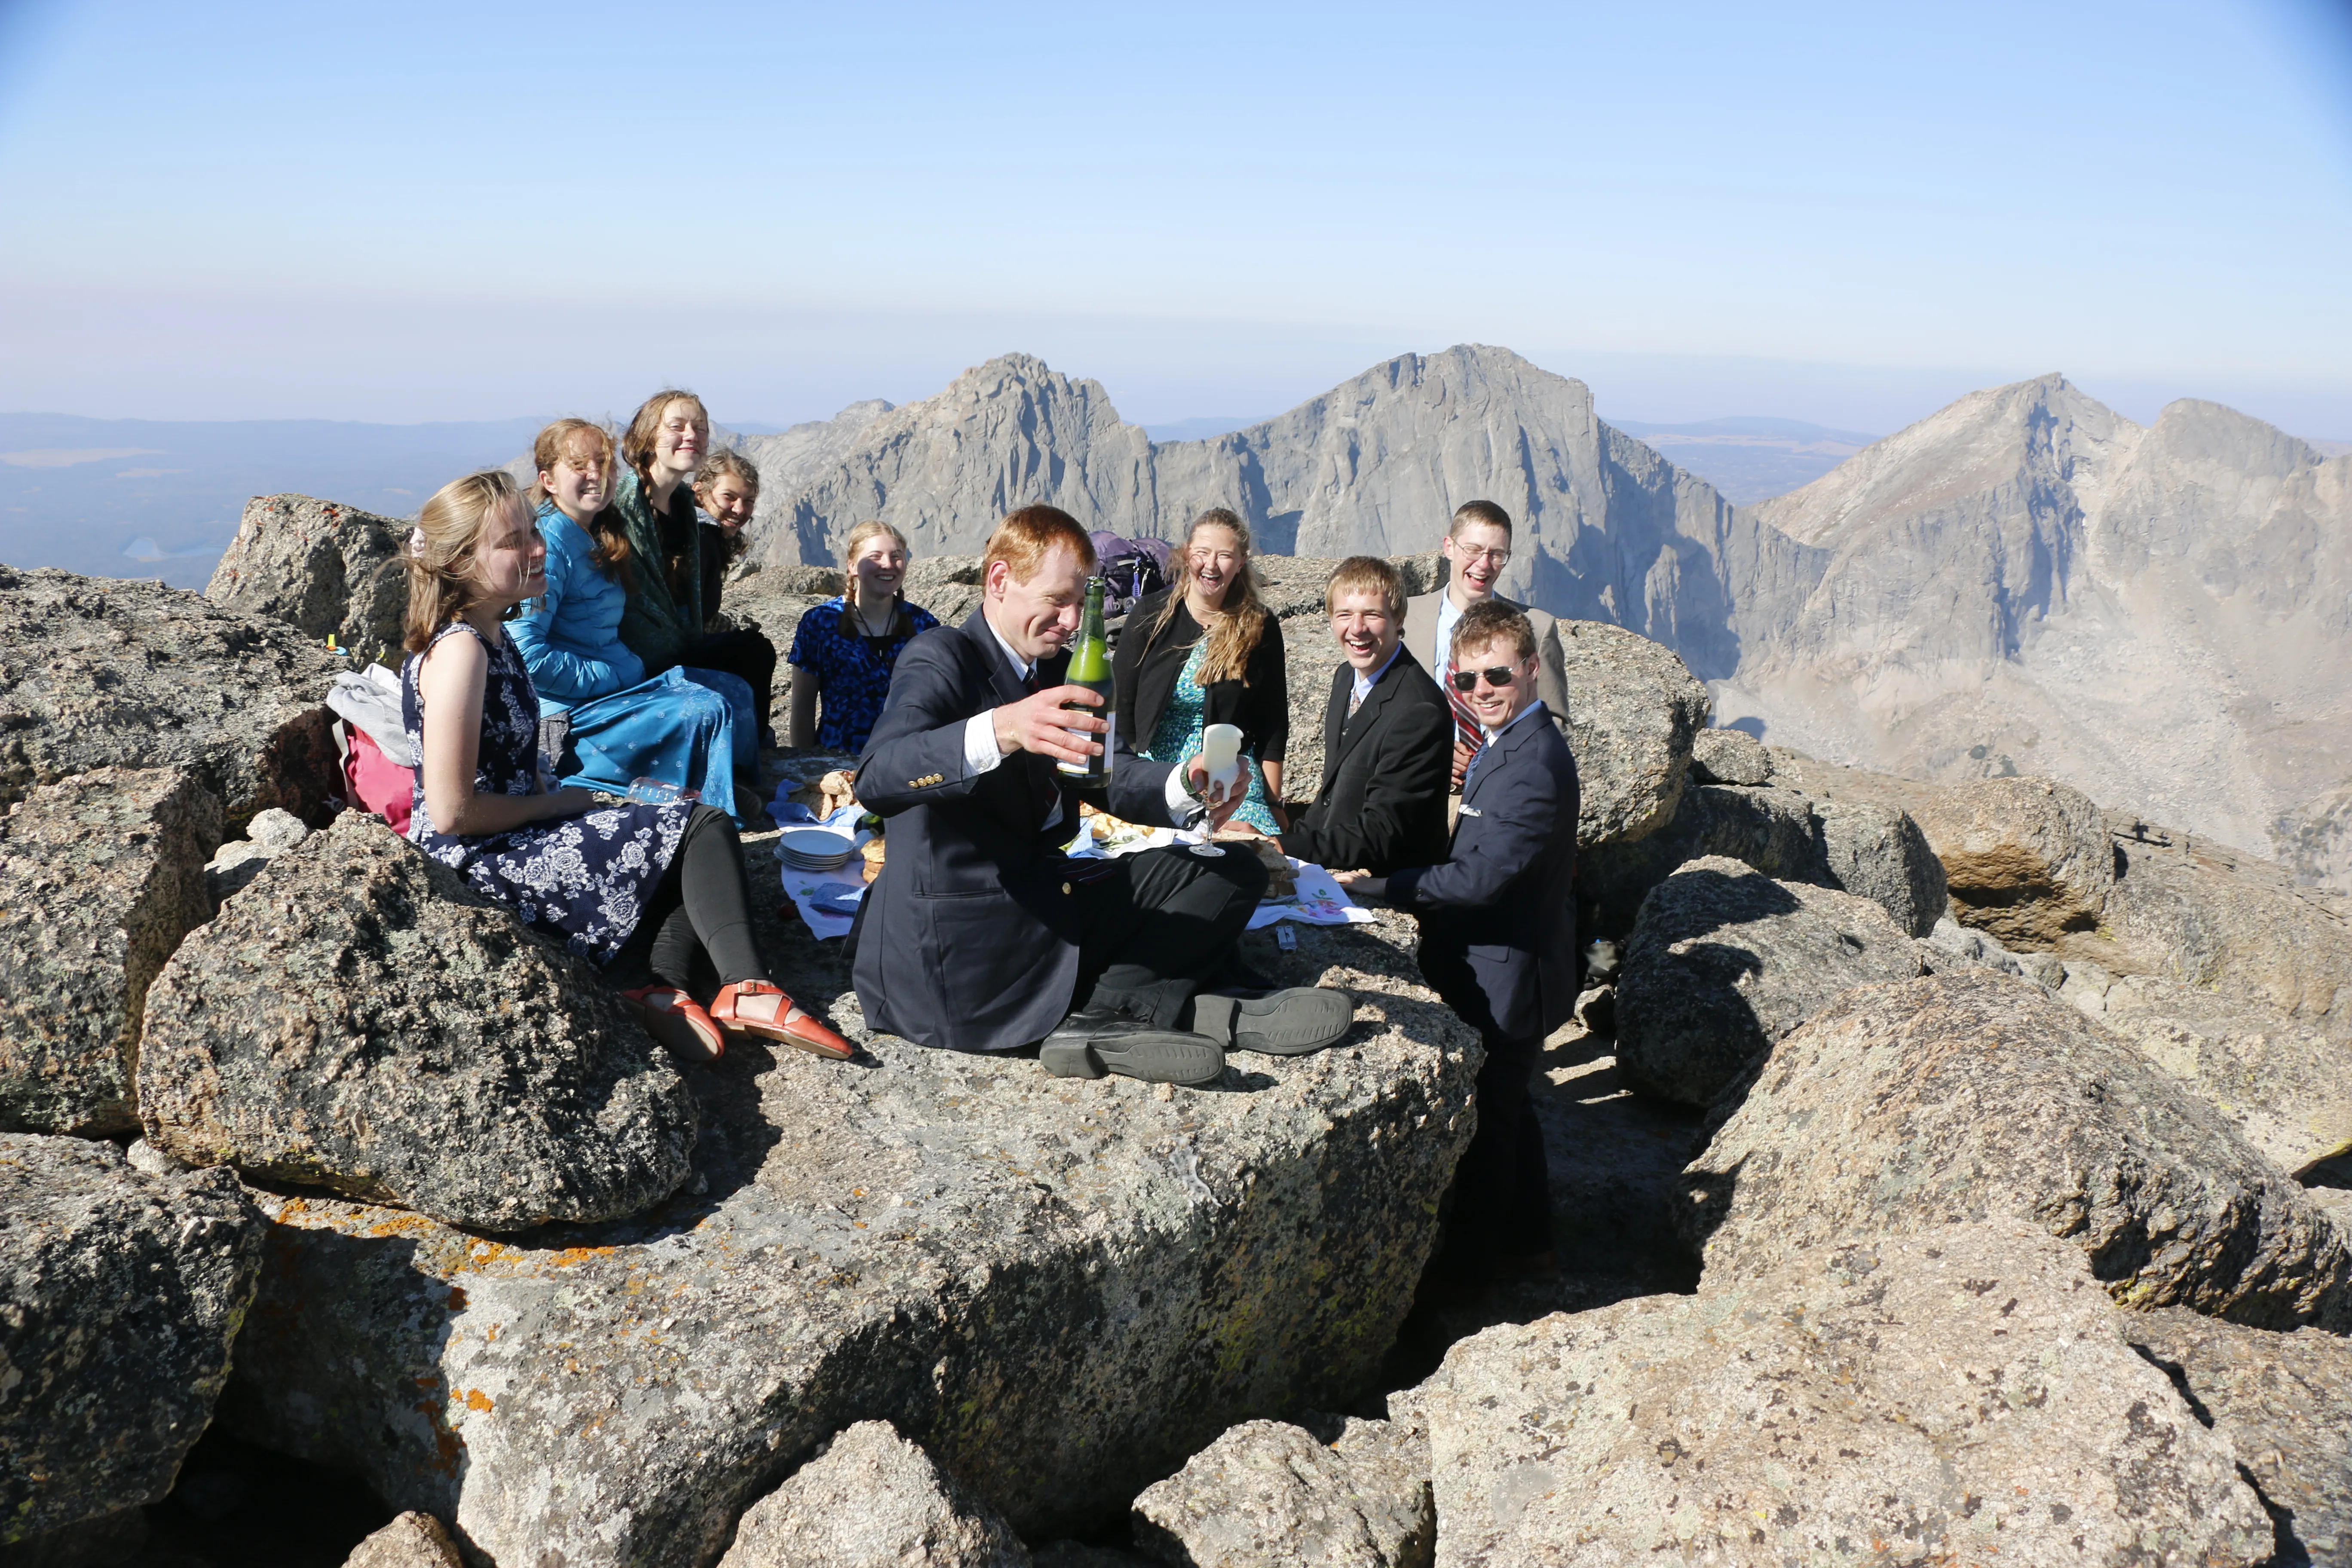 Wyoming Catholic College senior Margaret Serchen and fellow students climbed a mountain in the summer of 2022 and brought along dress clothes to enjoy a picnic on its summit. While there, Serchen even played a tune by Johann Sebastian Bach on her violin. Credit: Photo courtesy of Margaret Serchen